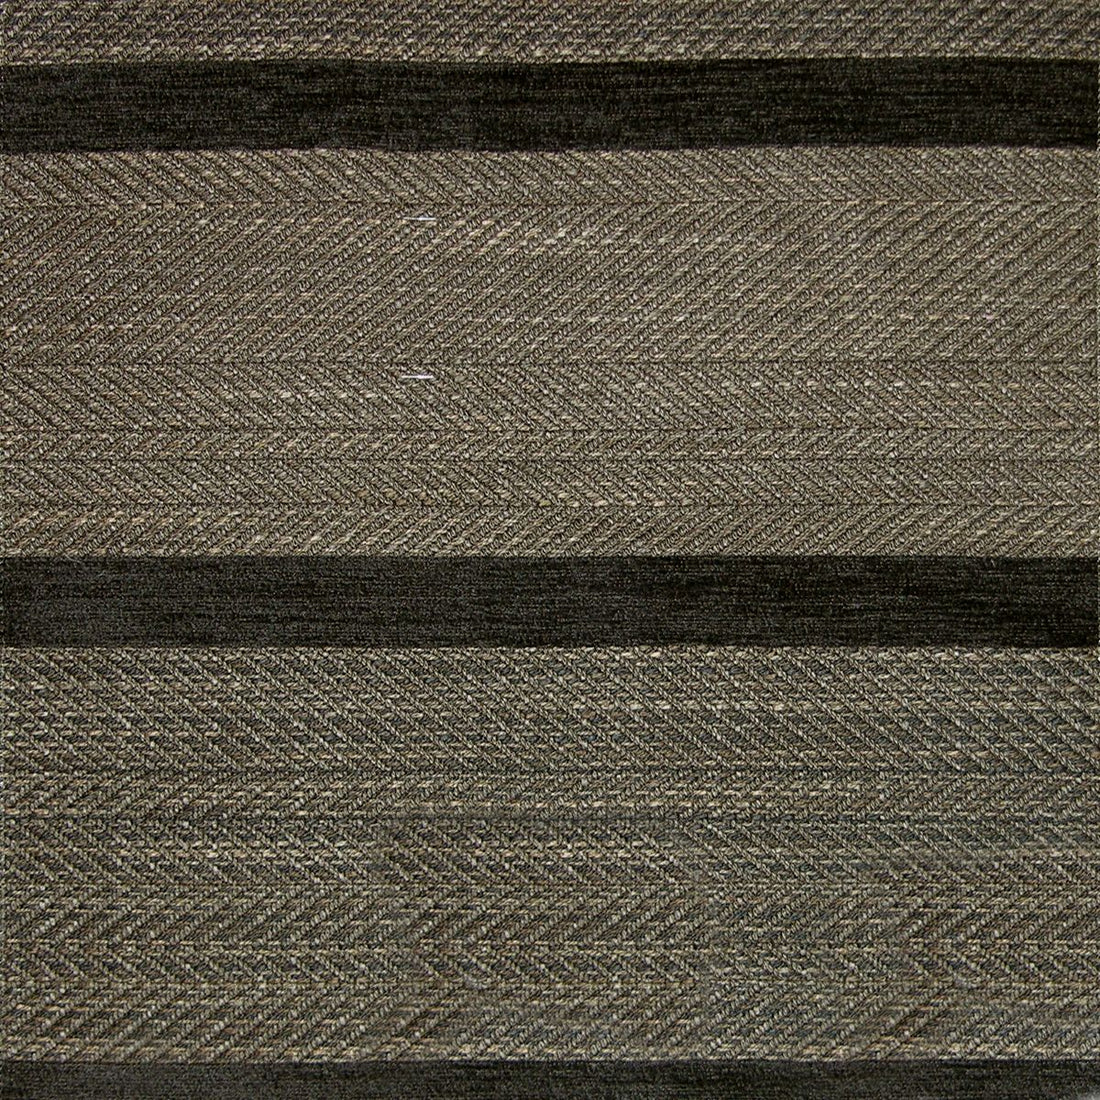 Hickory fabric in espresso color - pattern number AM MK481501 - by Scalamandre in the Old World Weavers collection